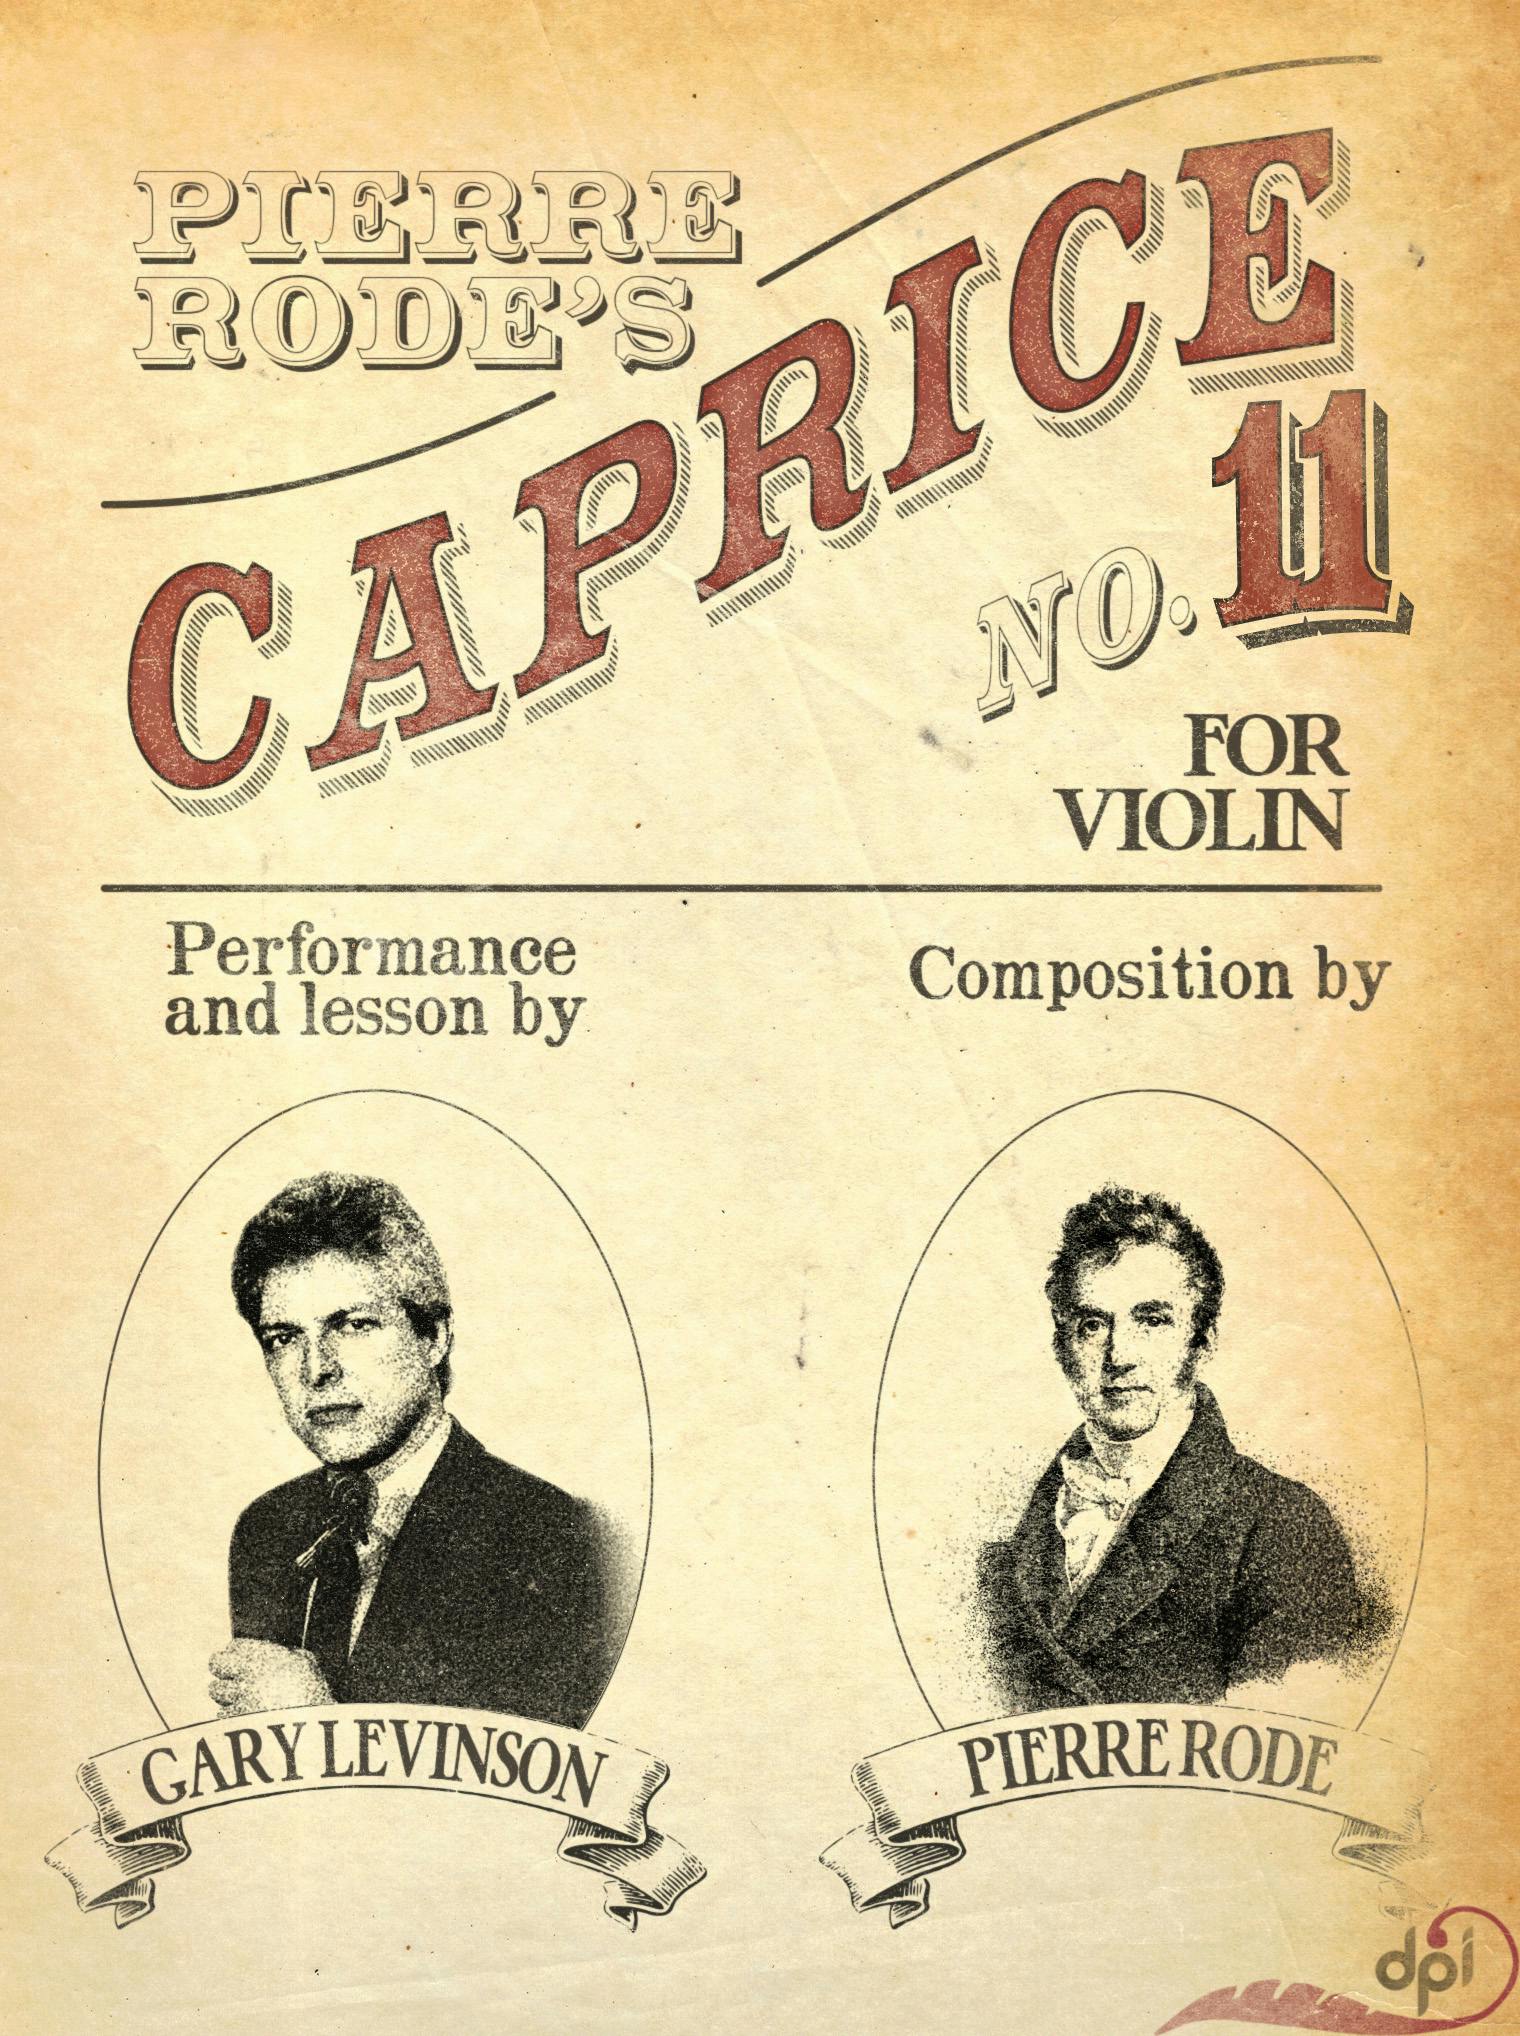 Pierre Rode's Caprice No. 11 cover